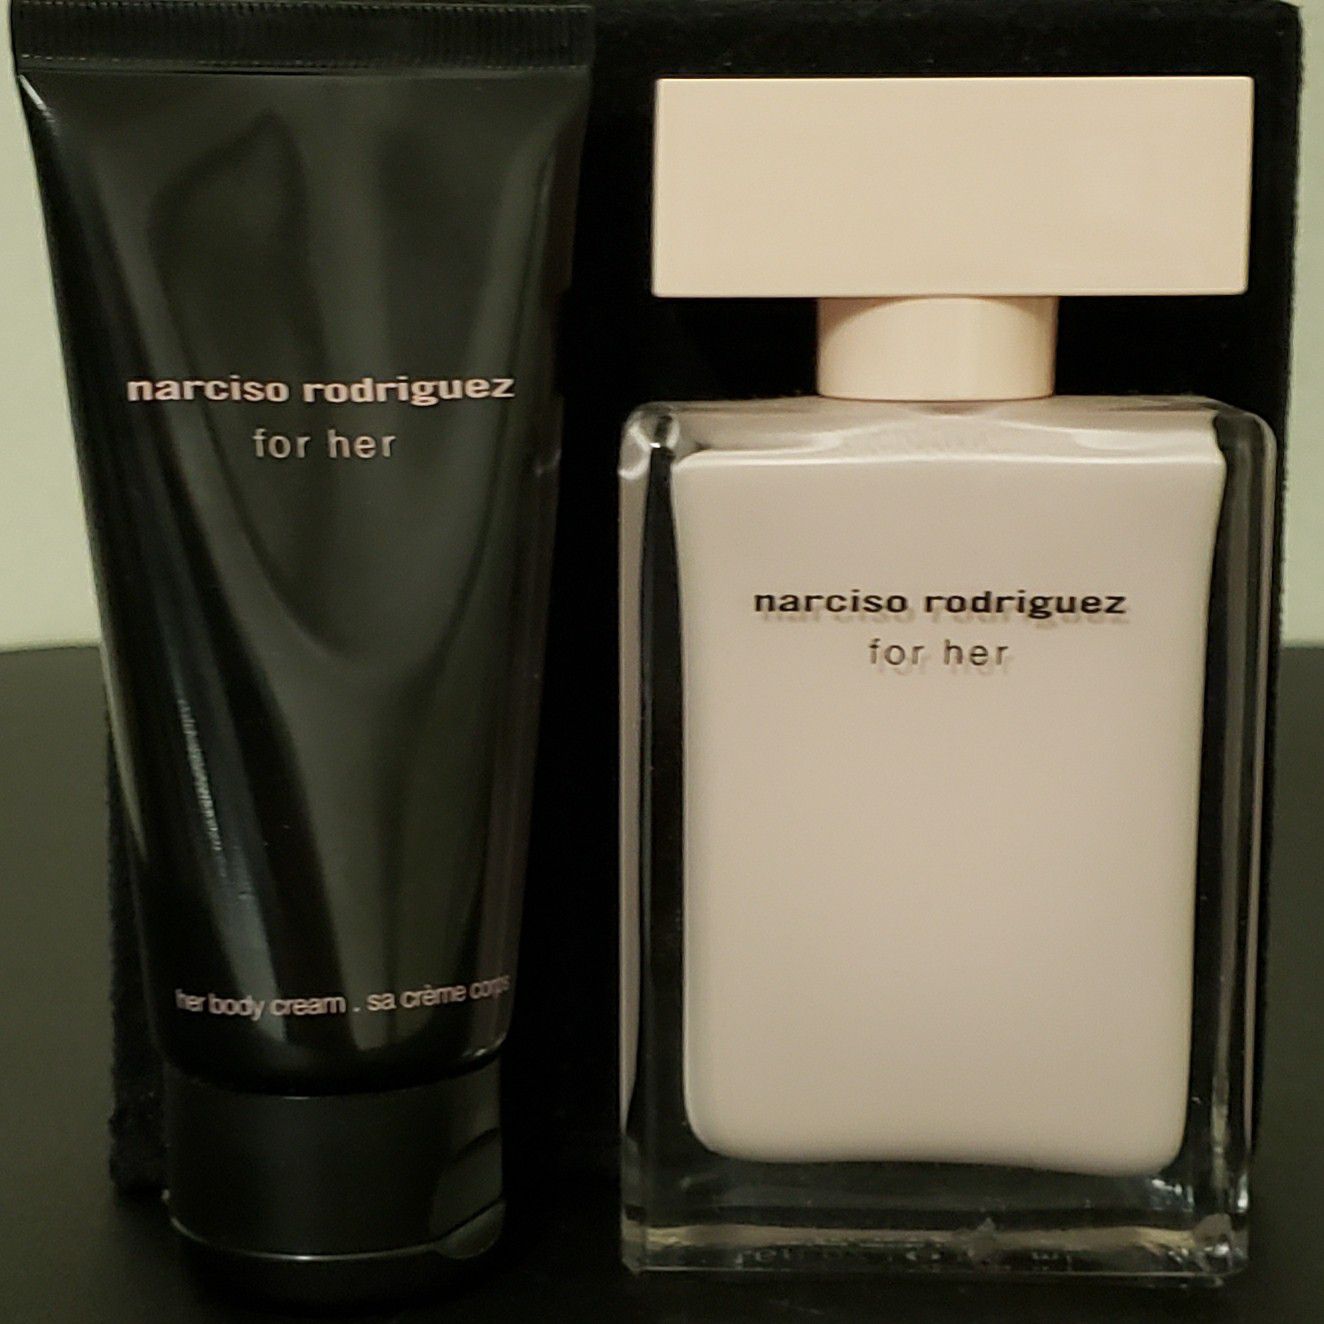 Narciso Rodriguez, for her